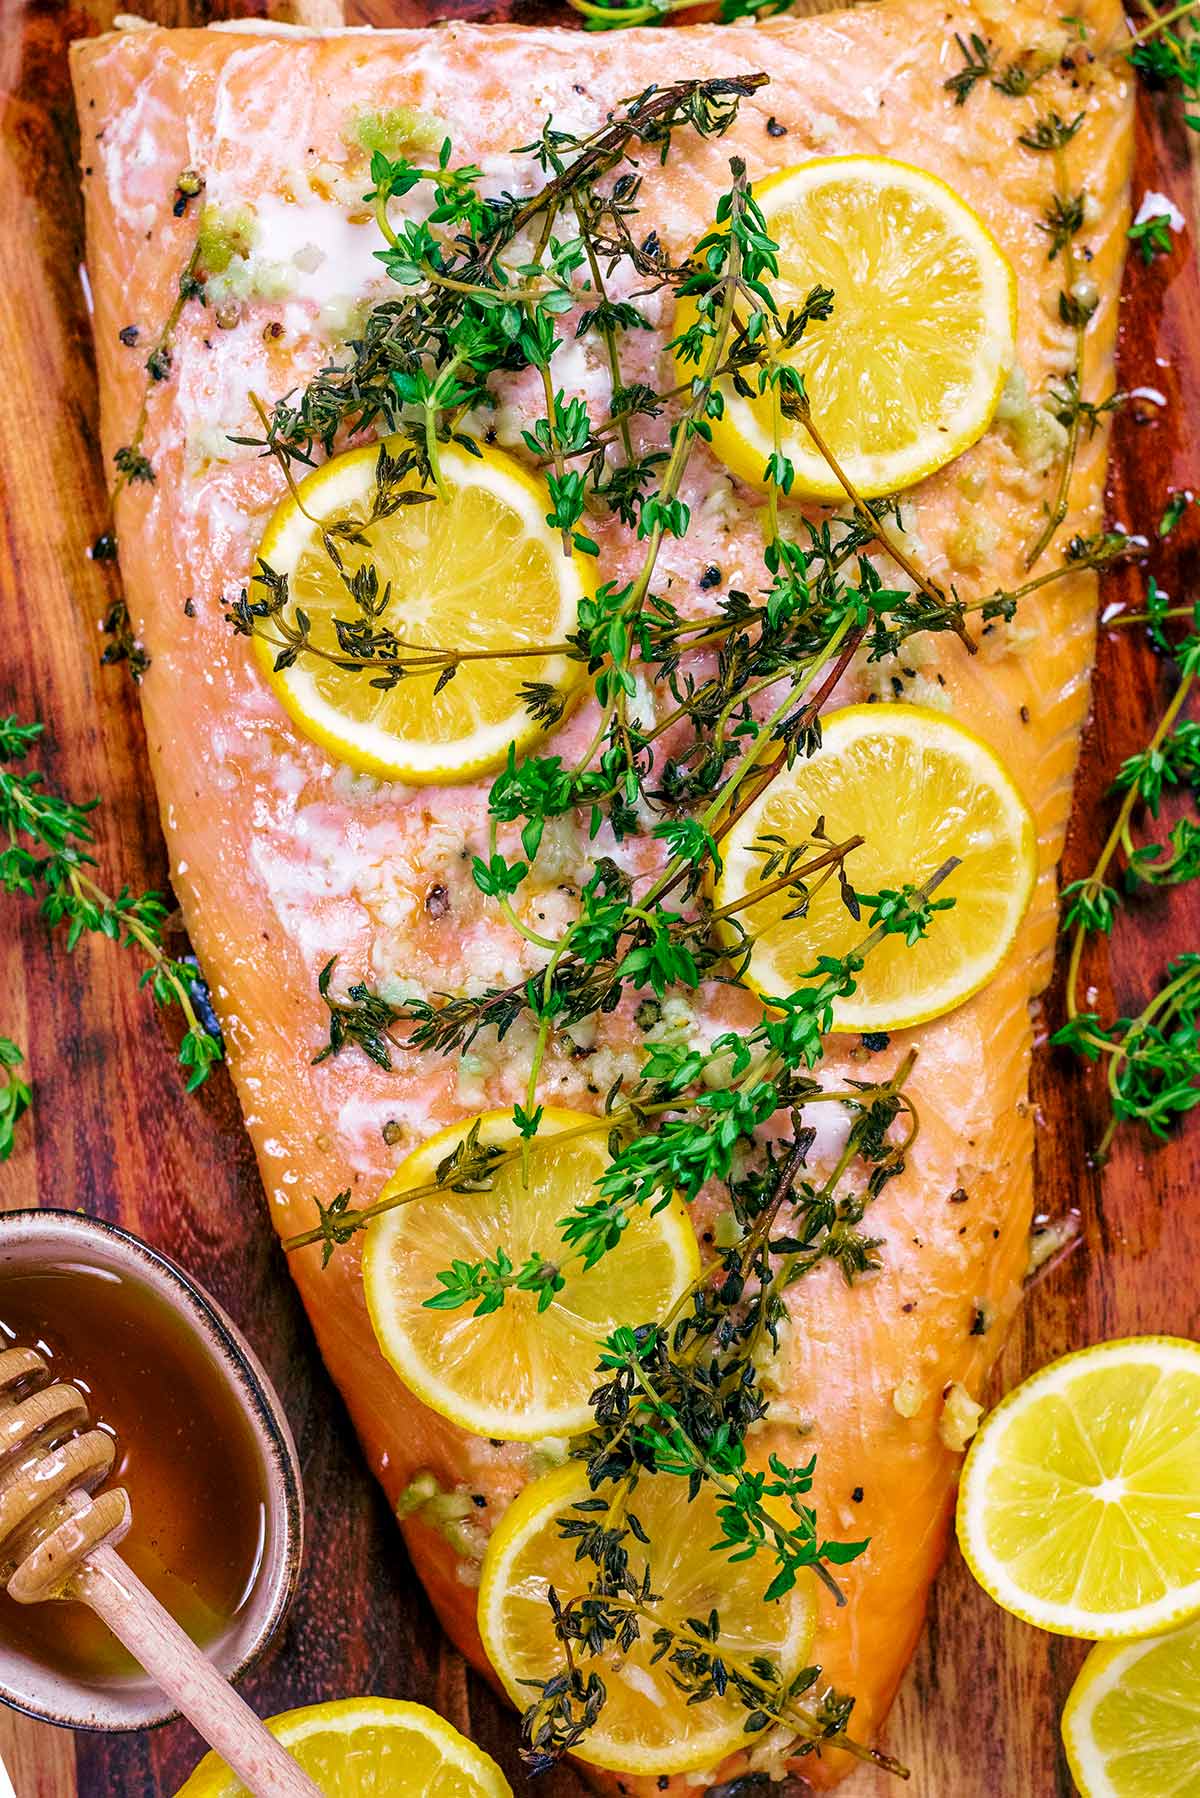 Slices of lemon and sprigs of thyme on top of a cooked side of salmon.